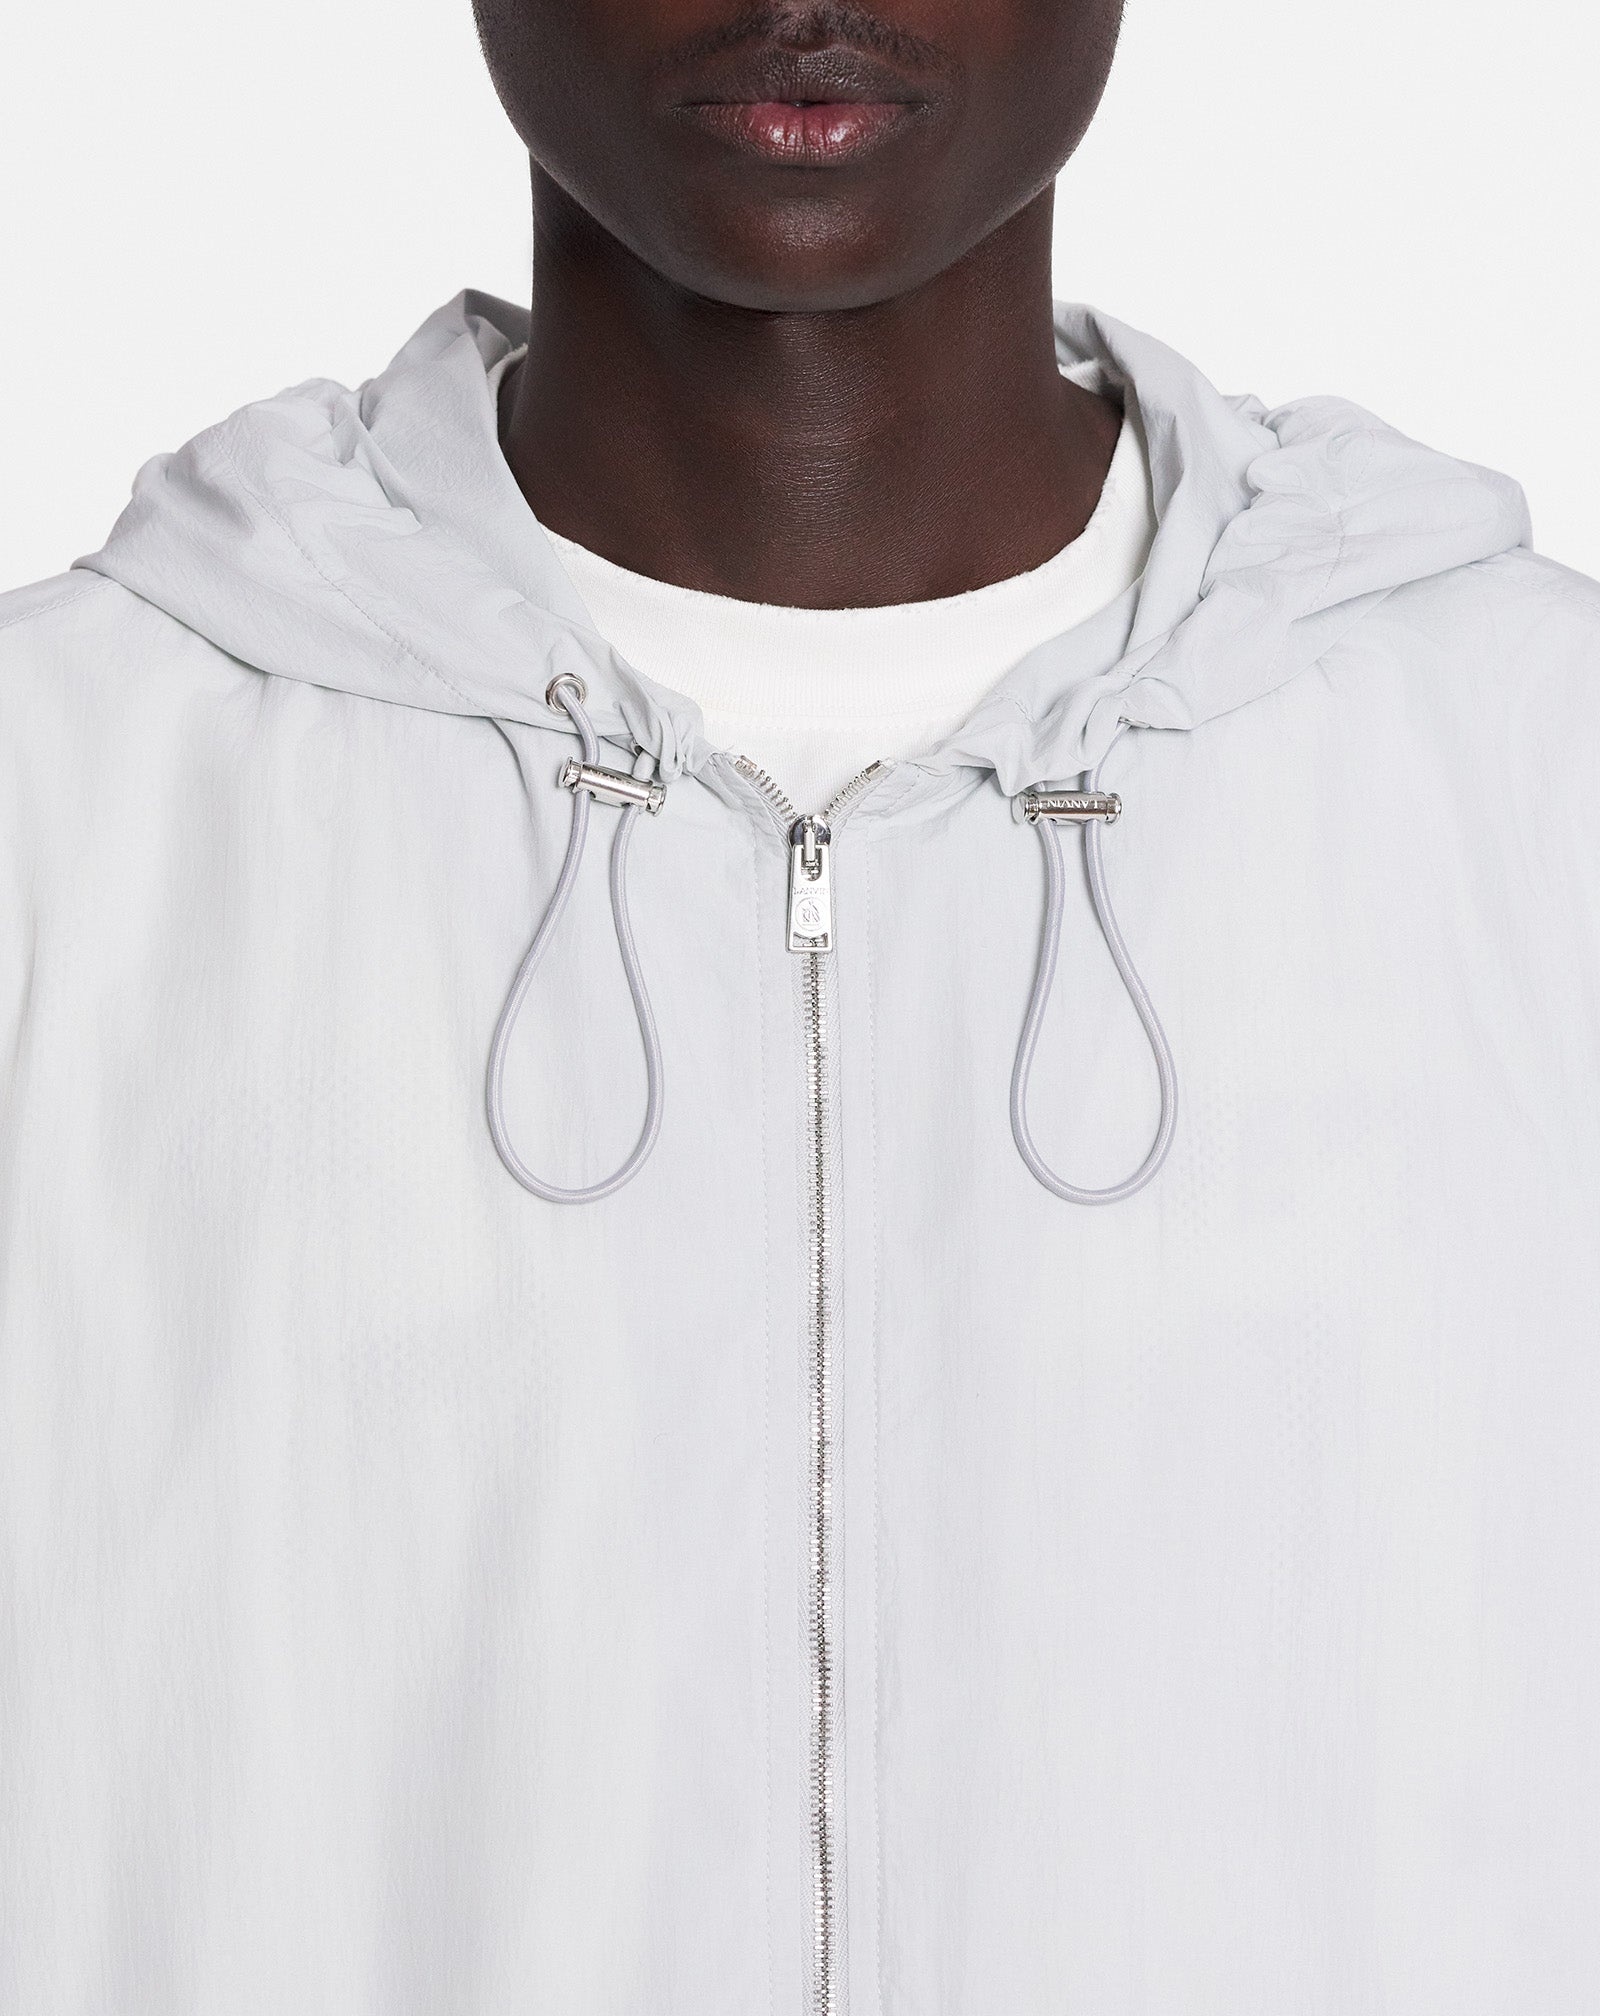 LANVIN X FUTURE ZIPPED HOODIE WITH CONTRASTING STRIPES - 5